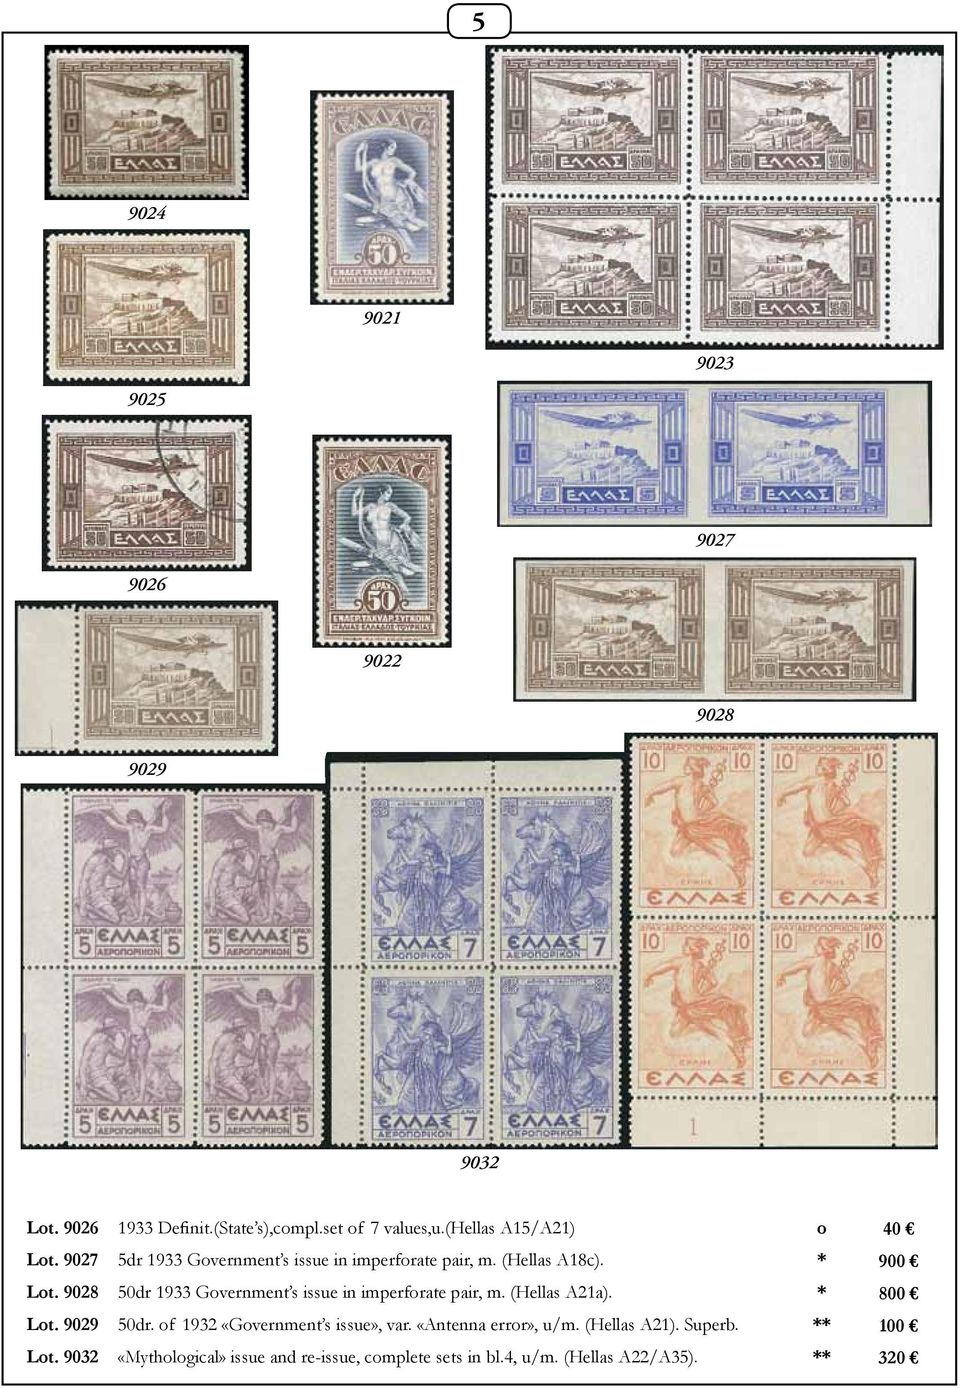 9028 50dr 1933 Government s issue in imperforate pair, m. (Hellas A21a). * 800 Lot. 9029 50dr.